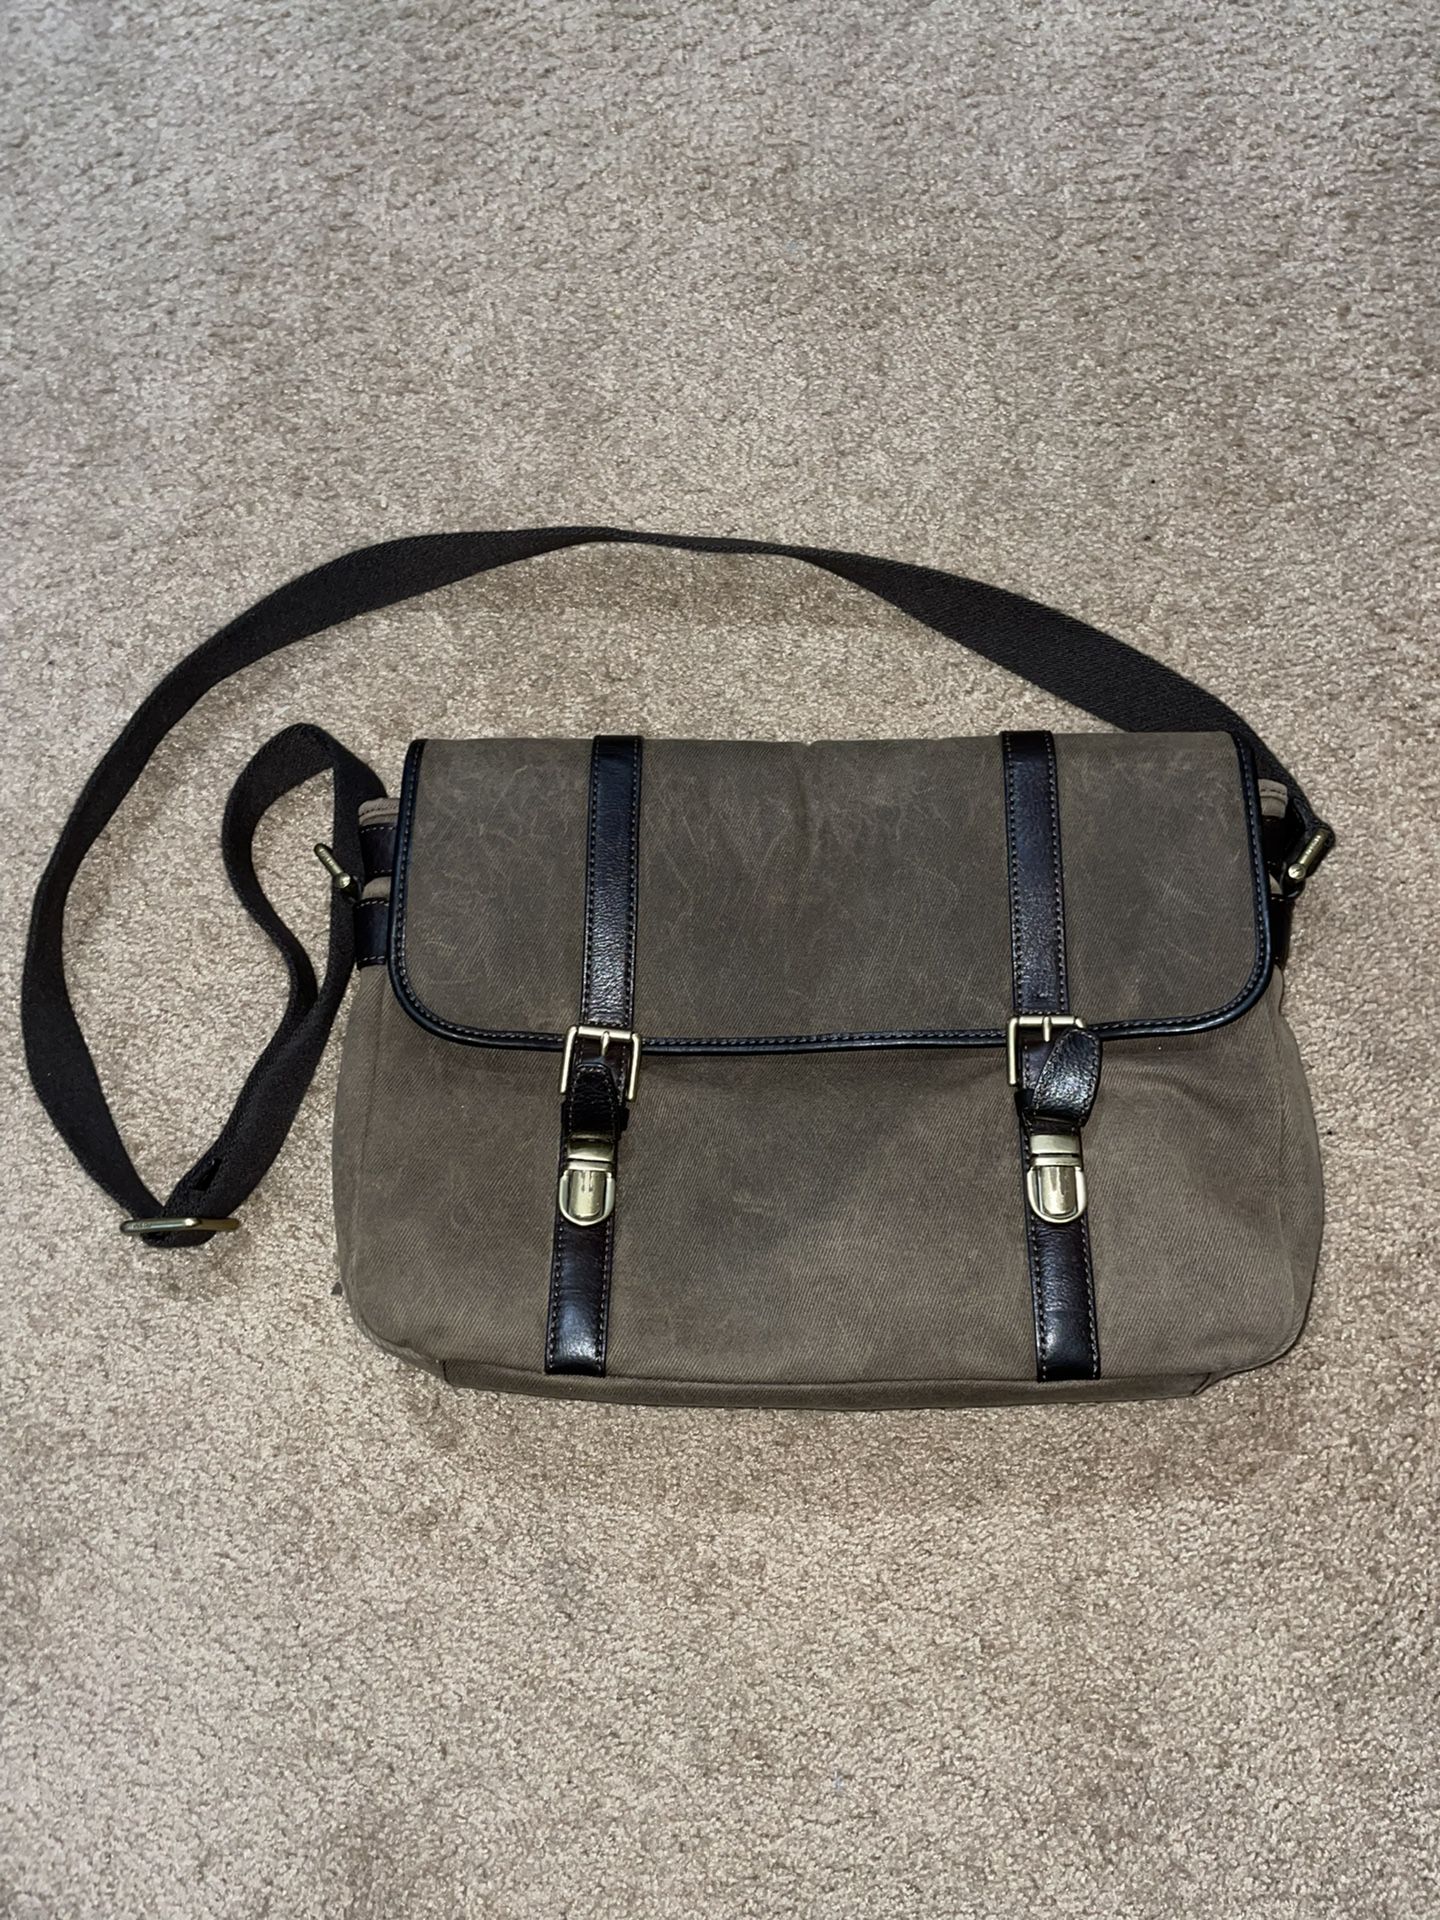 Fossil canvas leather messenger bag